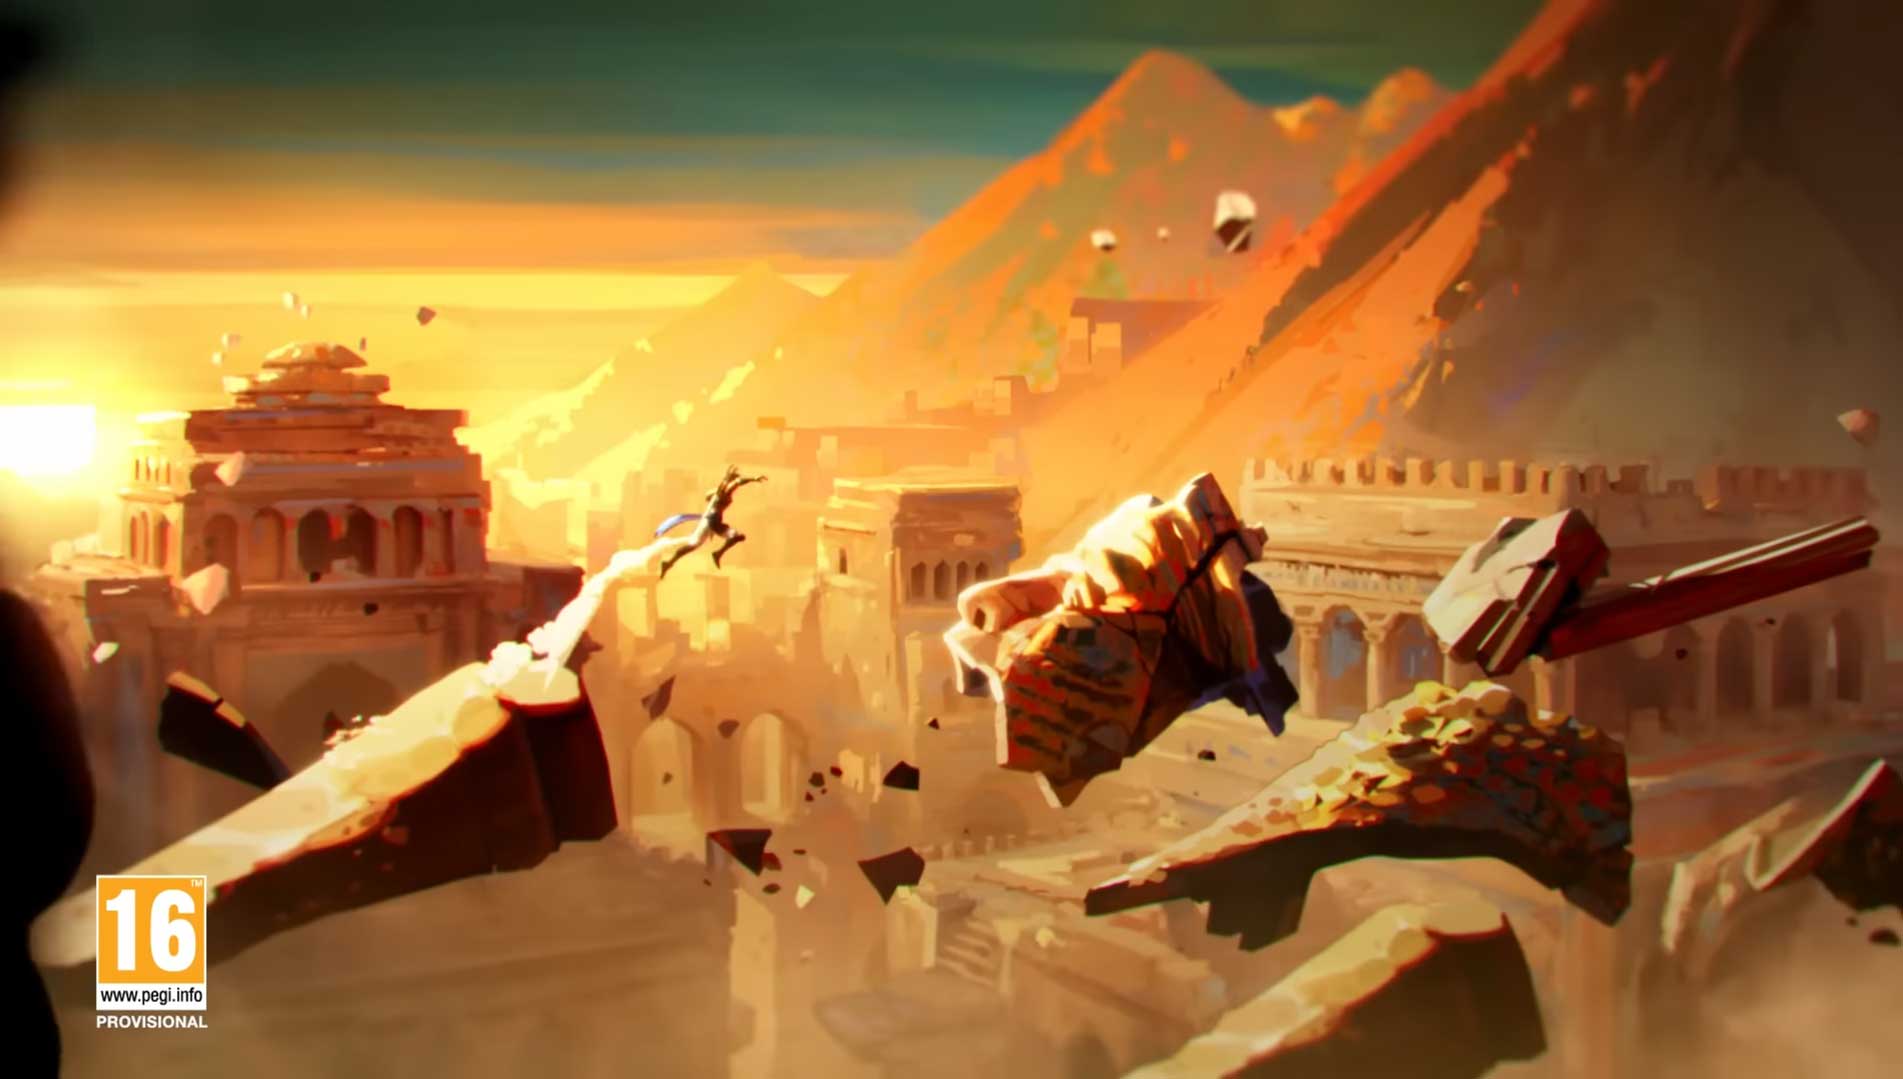 Prince of Persia: The Lost Crown - World Trailer